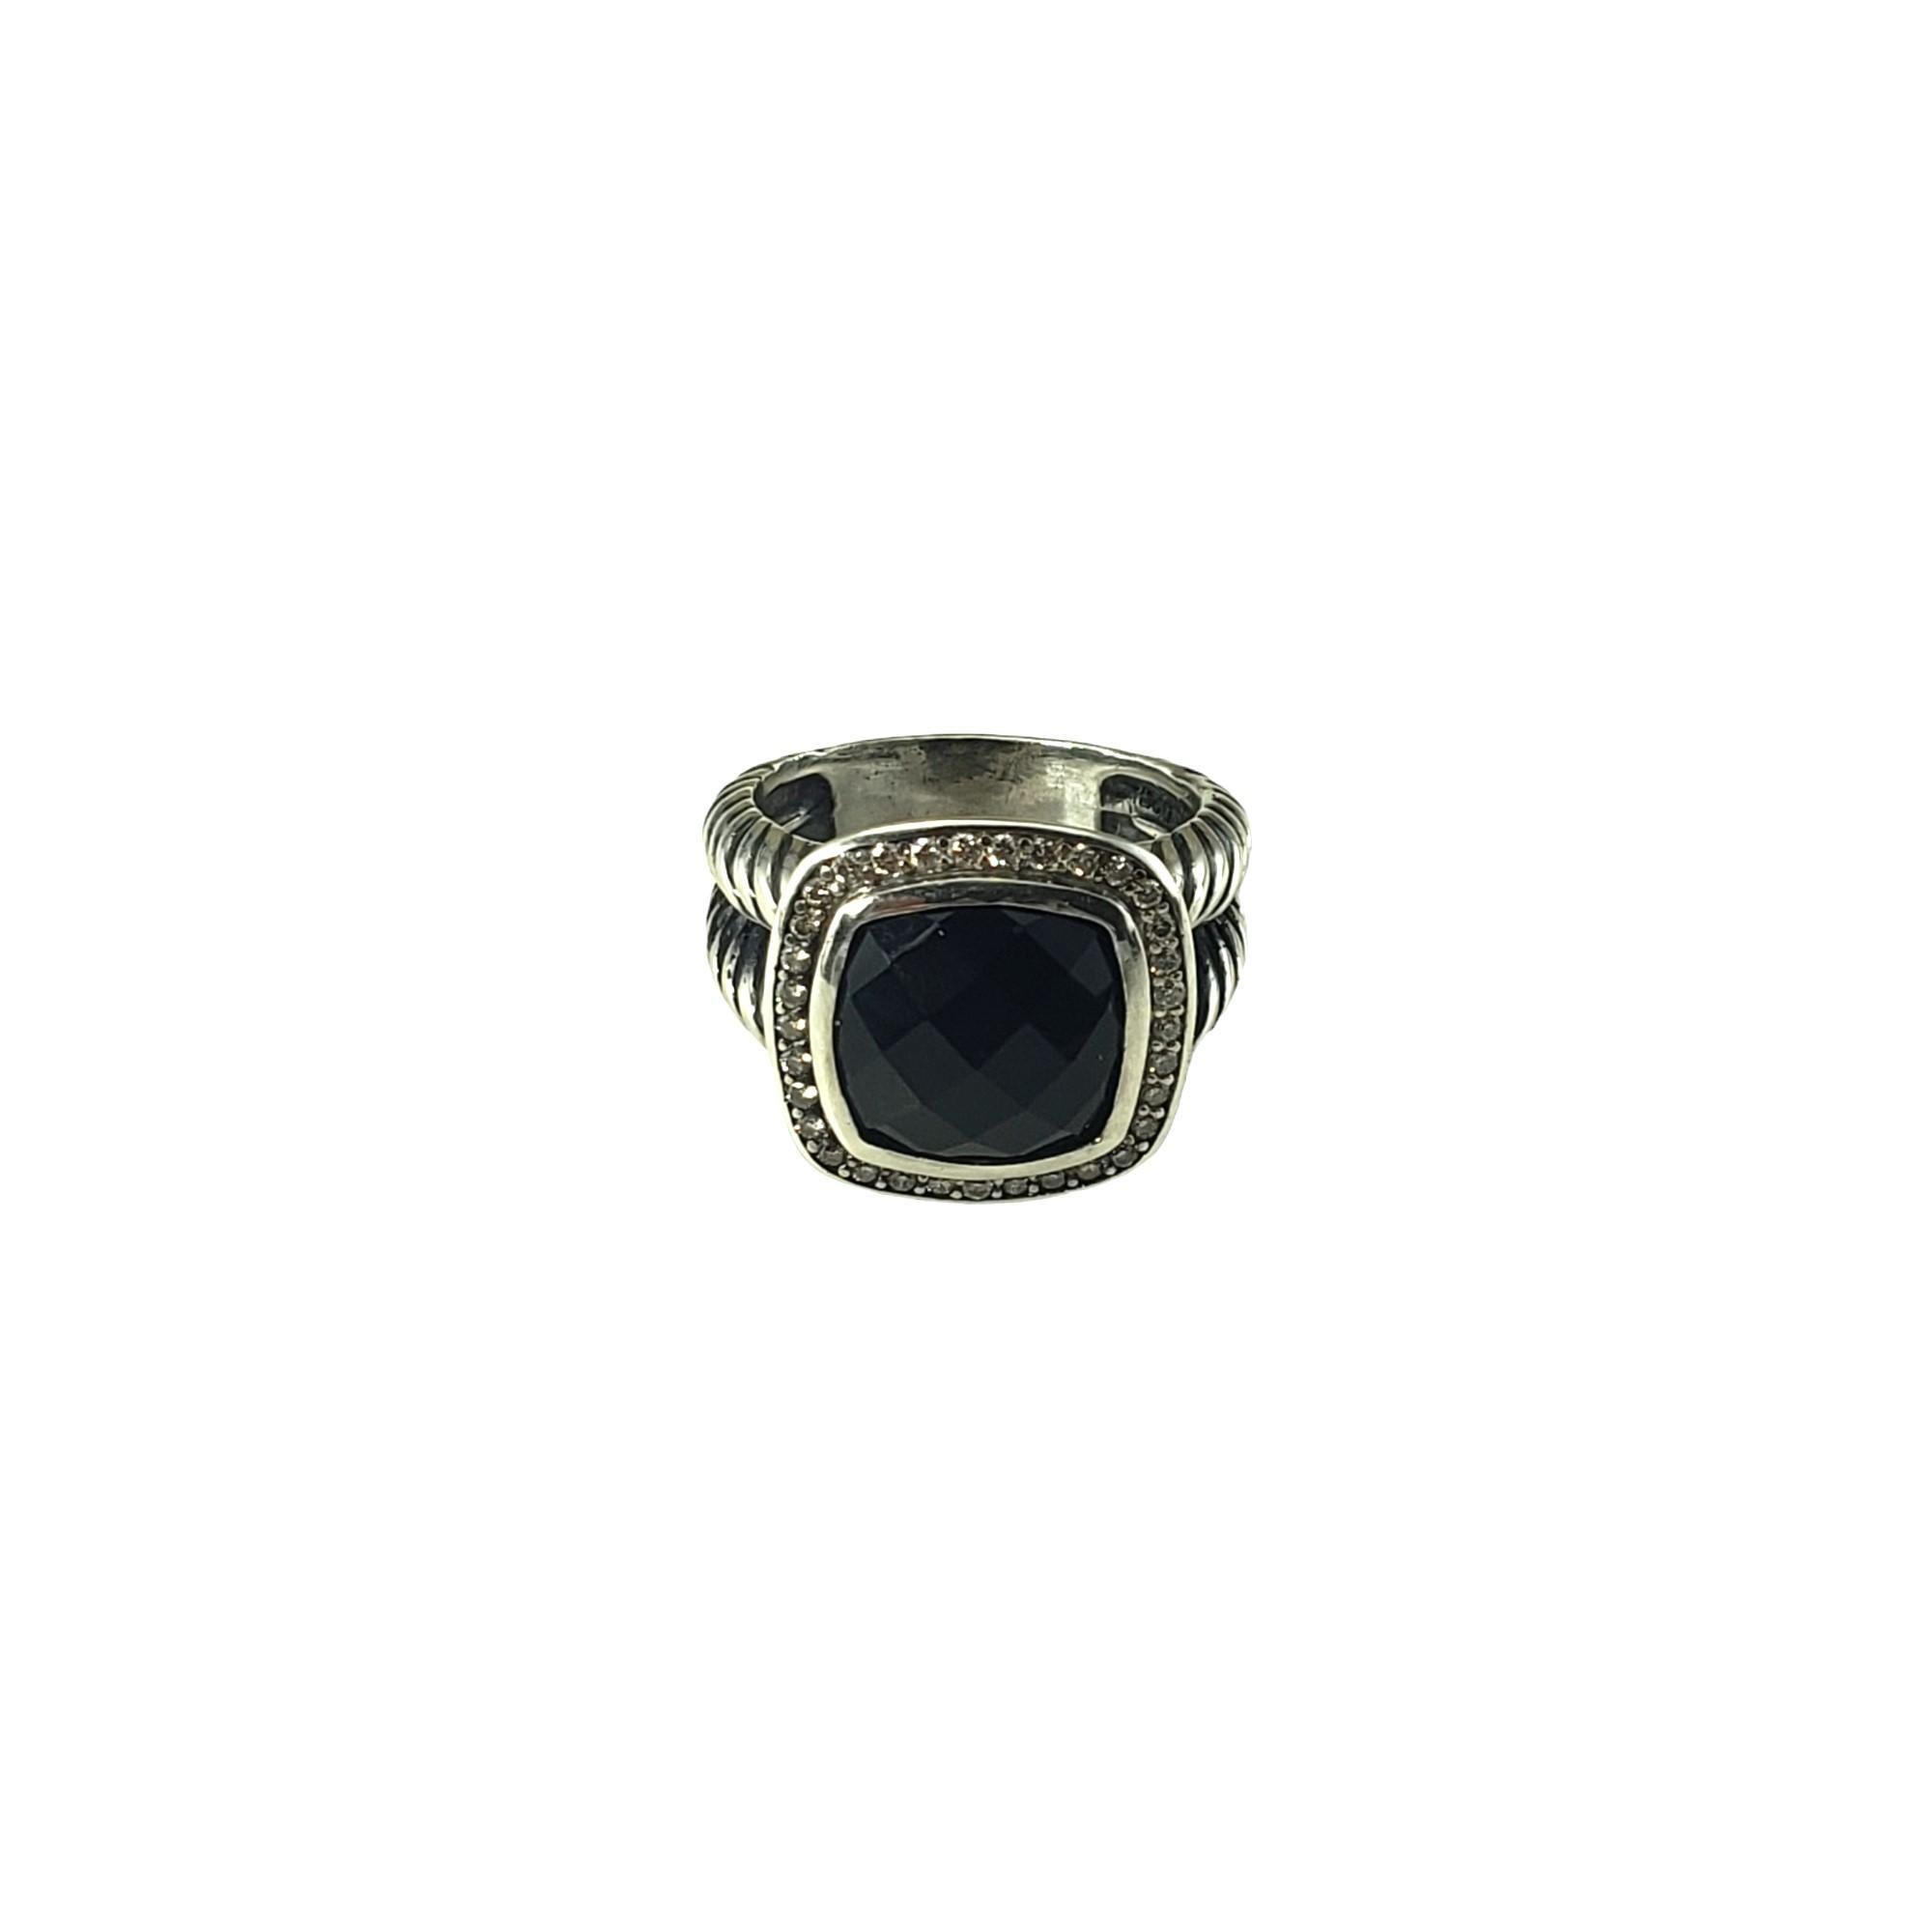 David Yurman Sterling Silver Black Onyx and Diamond Ring Size 6-

This elegant David Yurman ring features one faceted black onyx stone (11 mm x 11 mm) surrounded by 32 round brilliant cut diamonds and set in beautifully detailed sterling silver. 